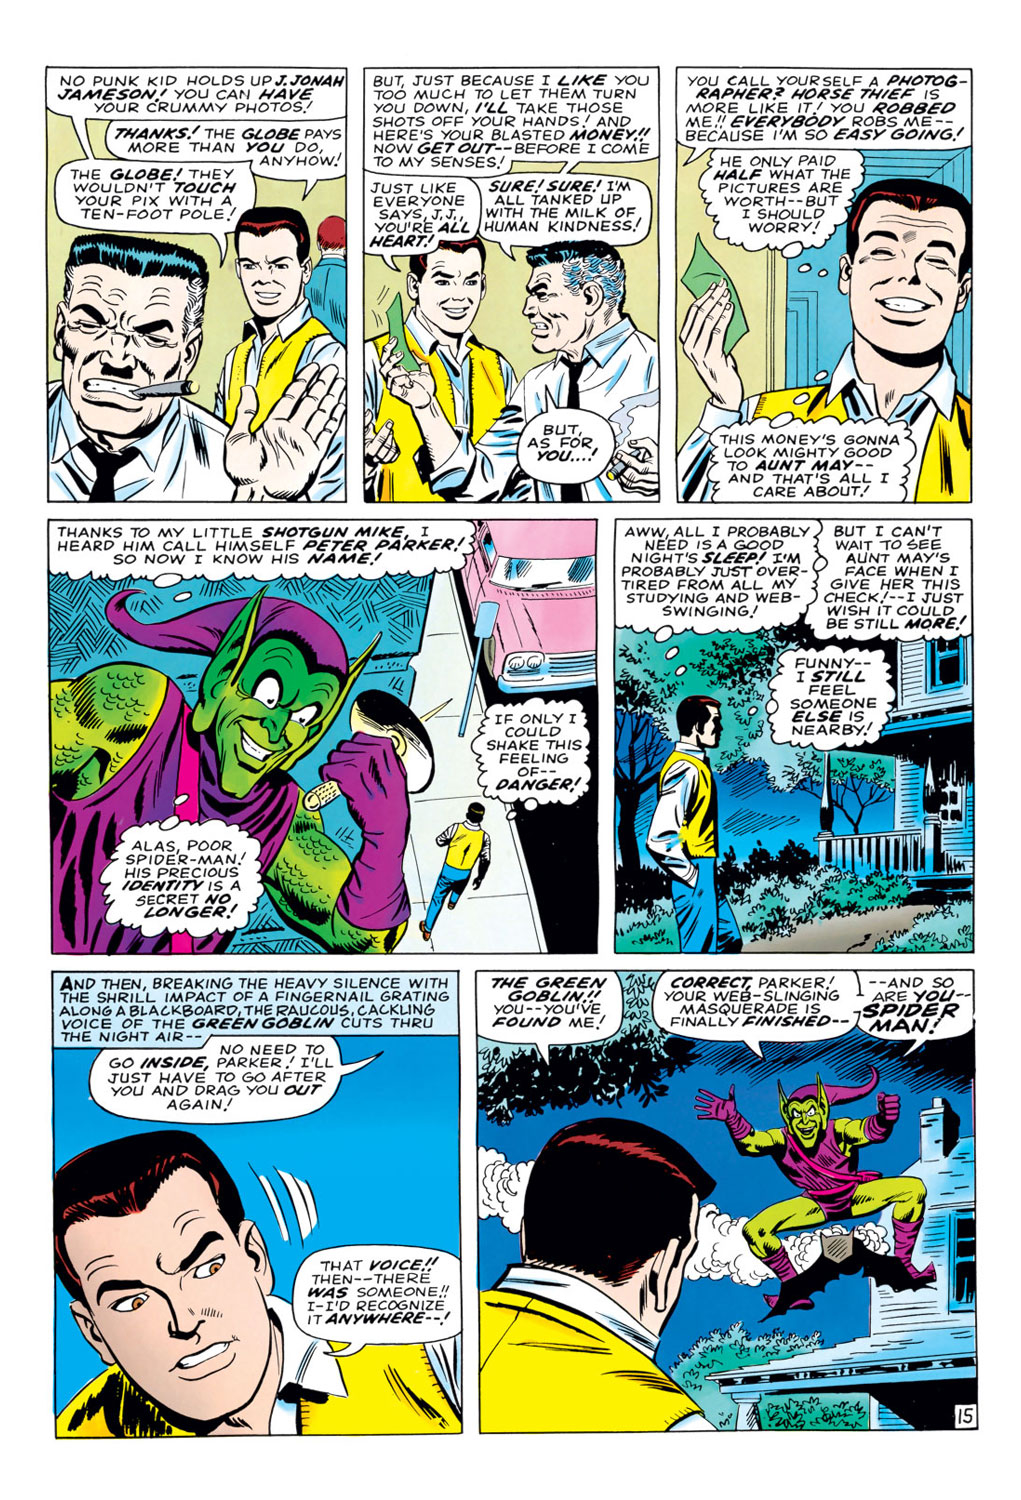 The Amazing Spider-Man (1963) 39 Page 15